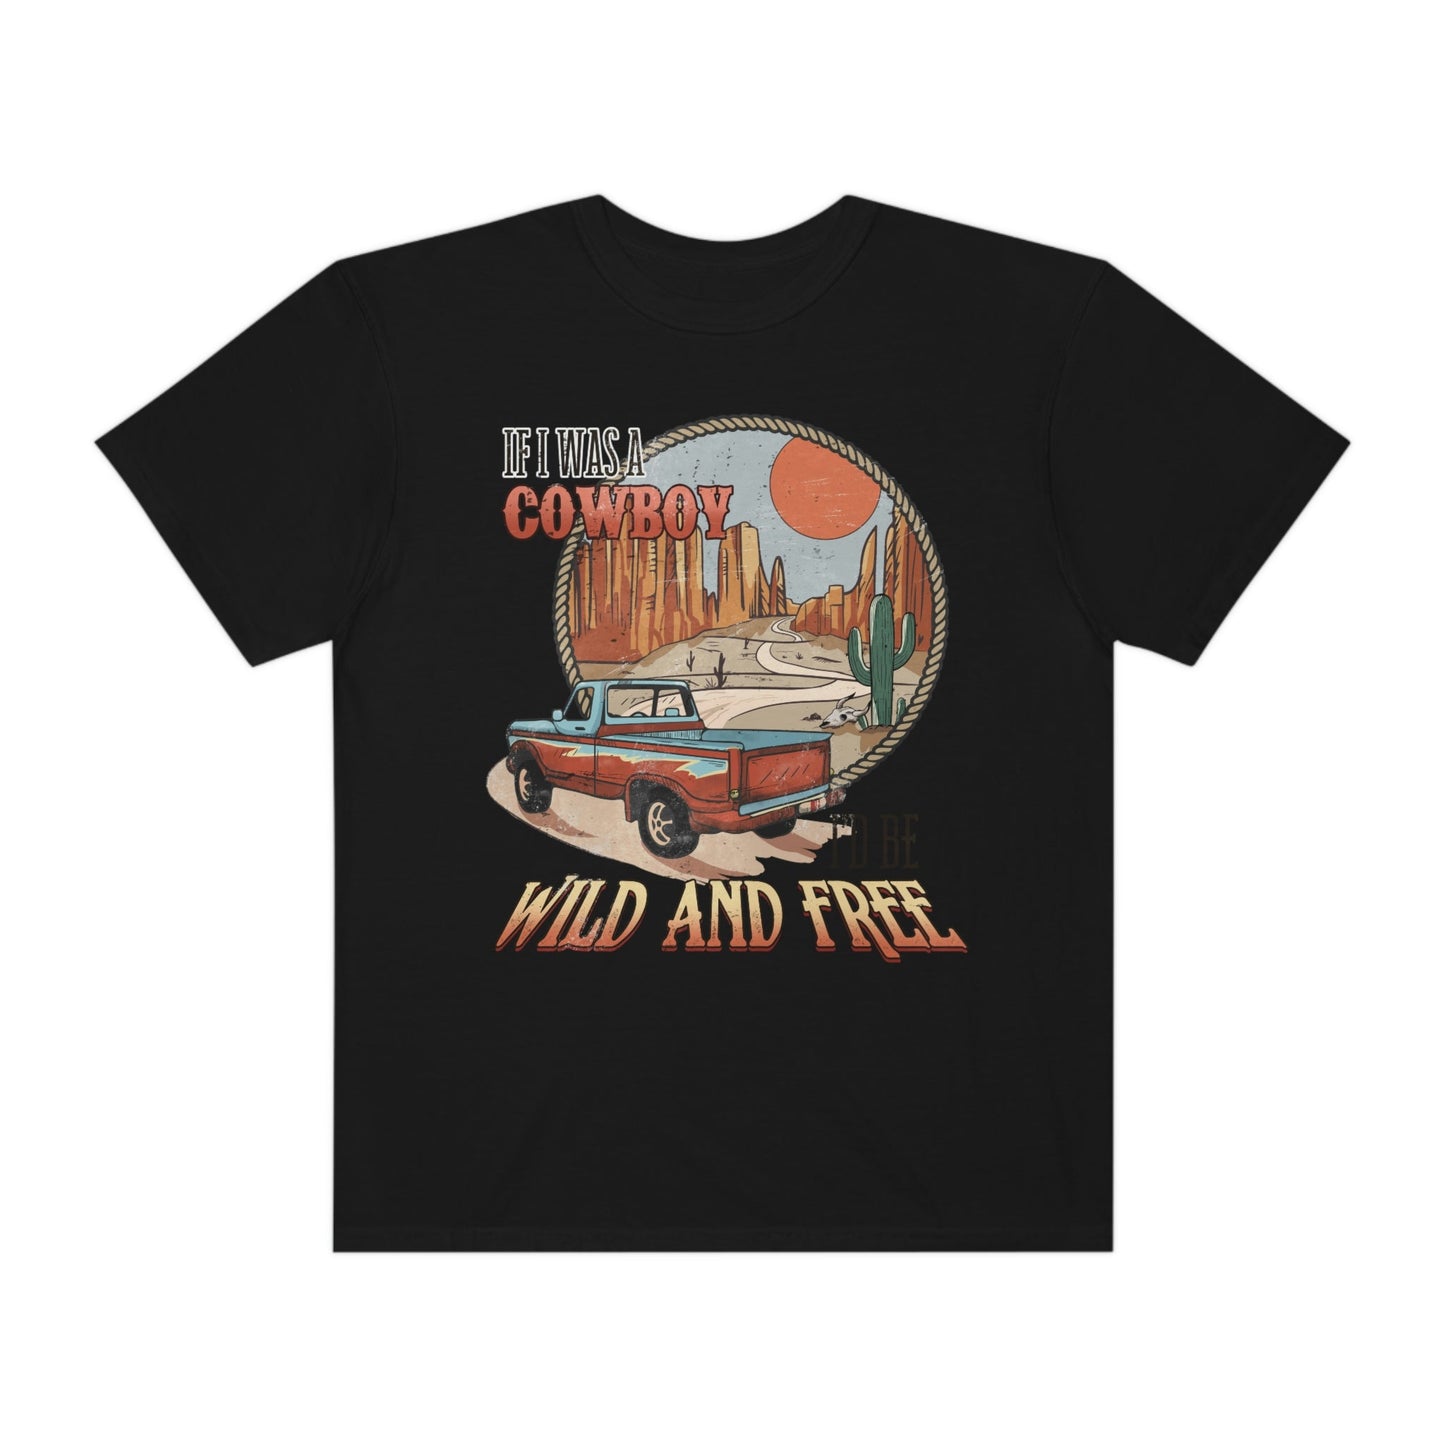 Wild and Free Cowboy Shirt, Comfort Colors Western Graphic Tee for Cowboys and Cowgirl T-Shirt